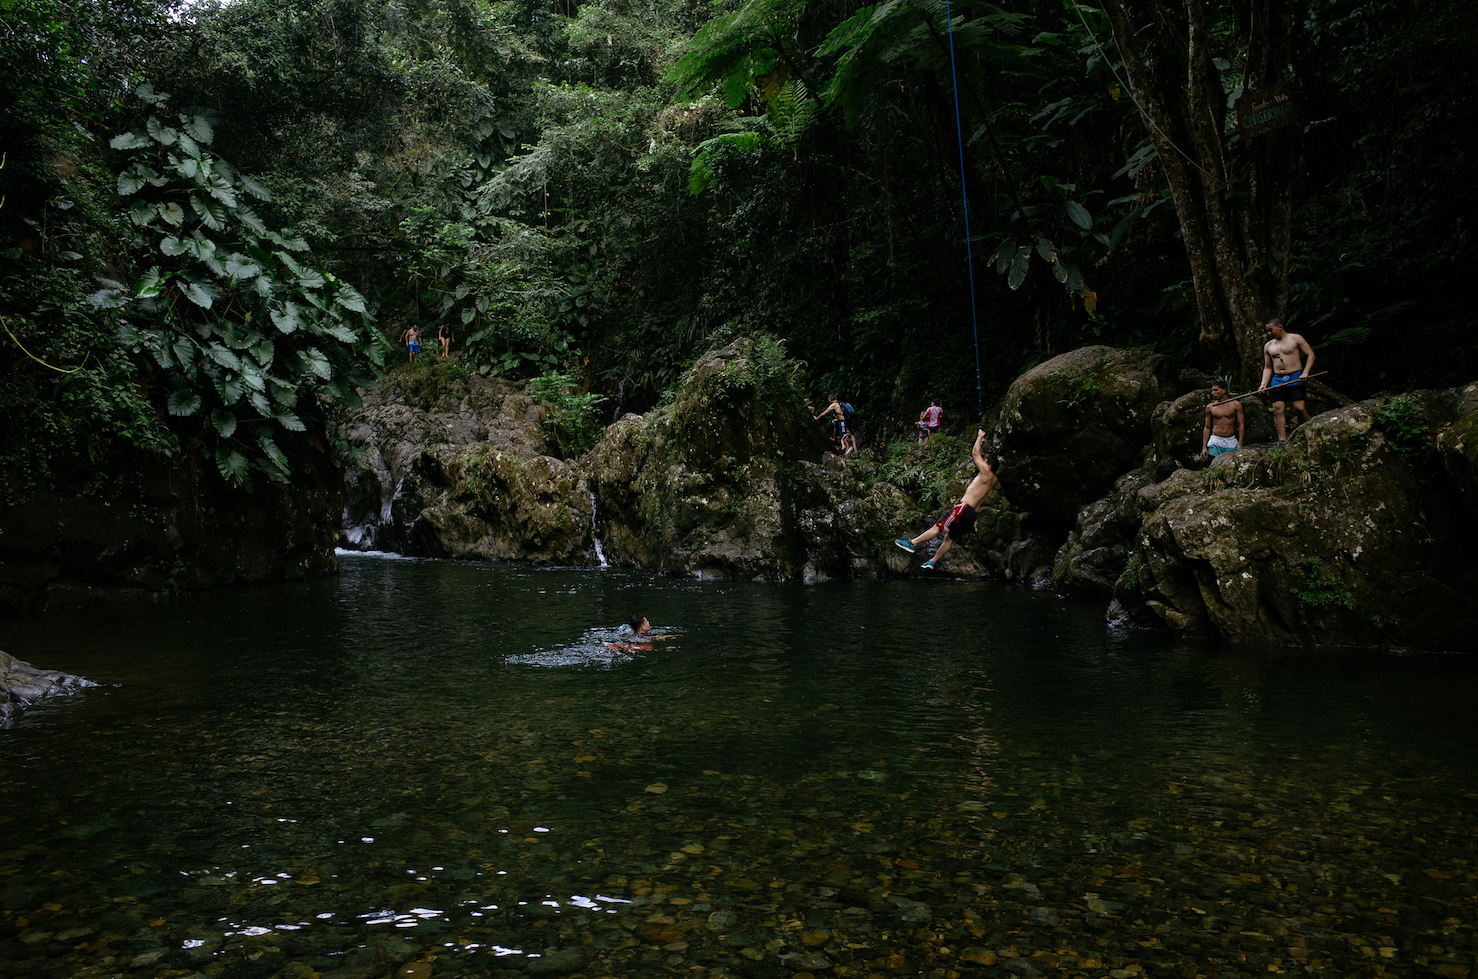 Swinging and water jumping in the forest, Fajado.